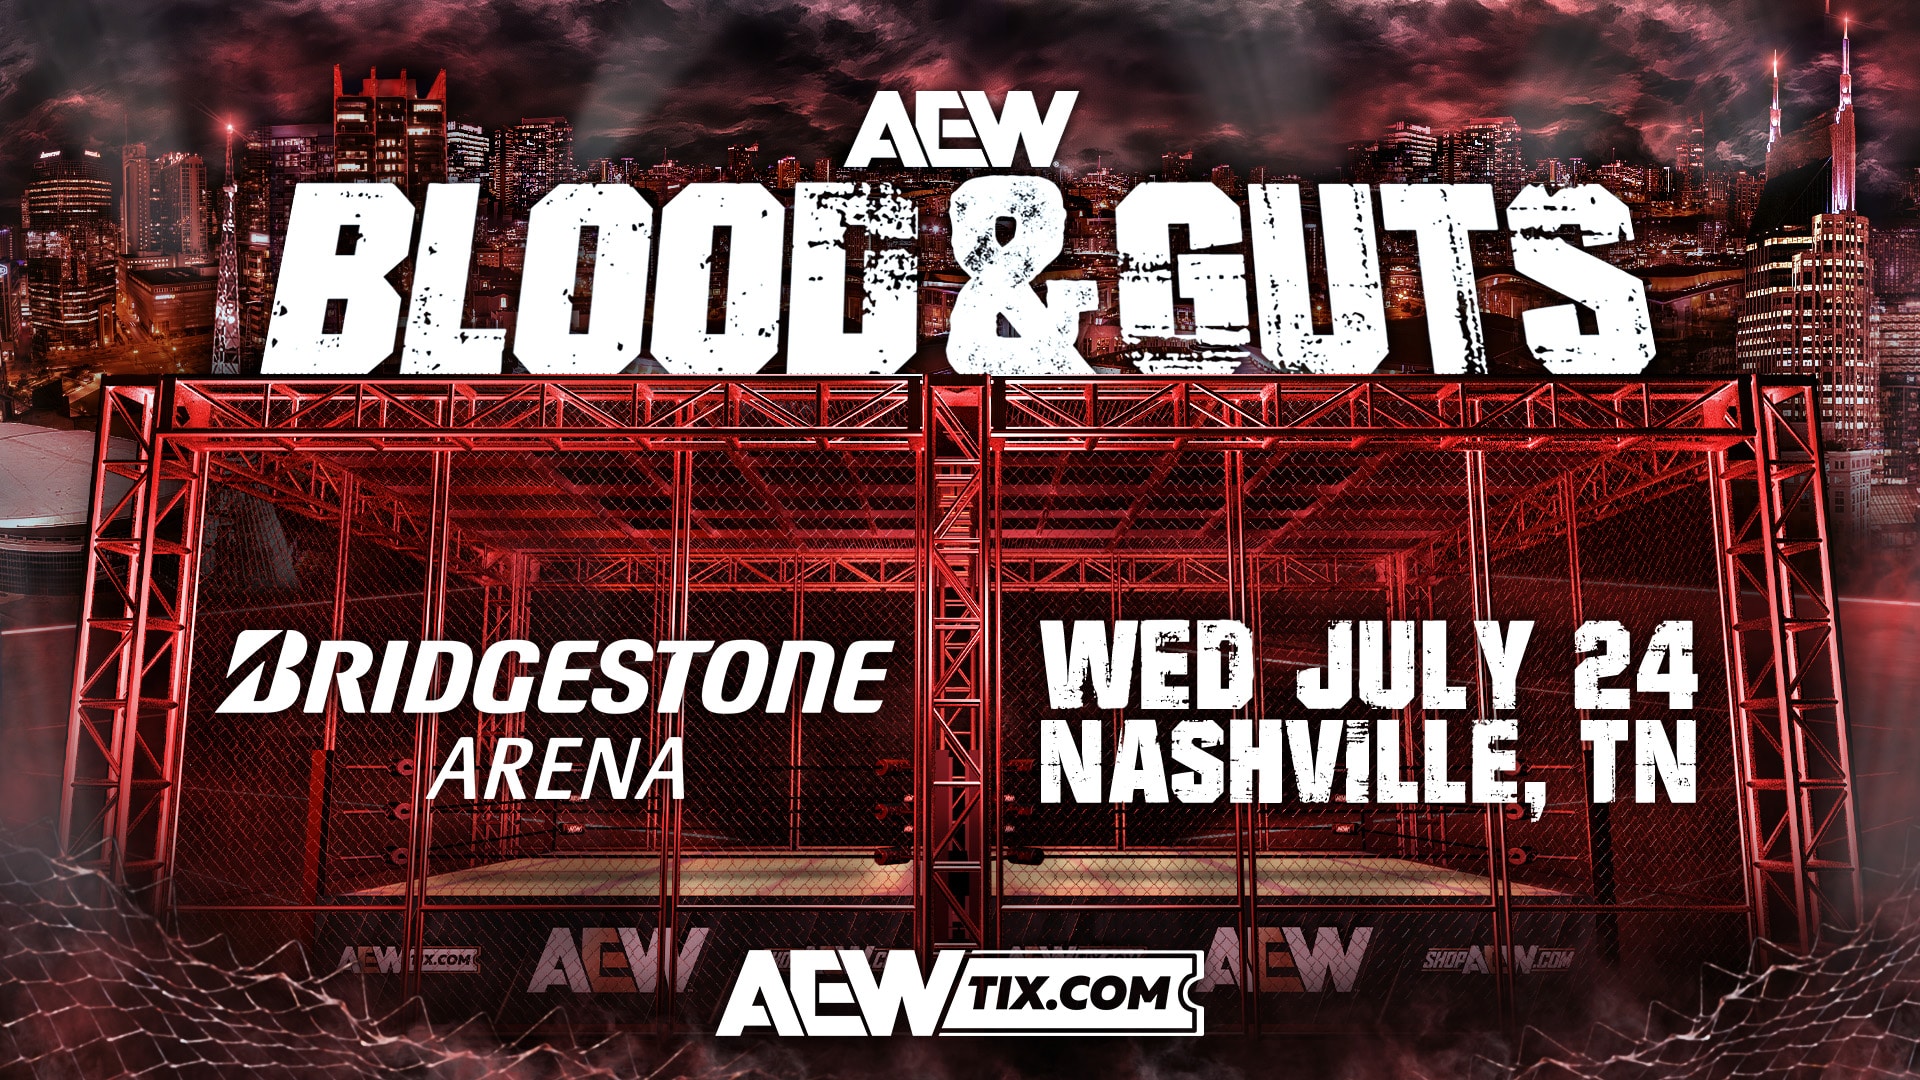 Mark Briscoe Announces His Commitment to Team AEW for the Blood & Guts Match